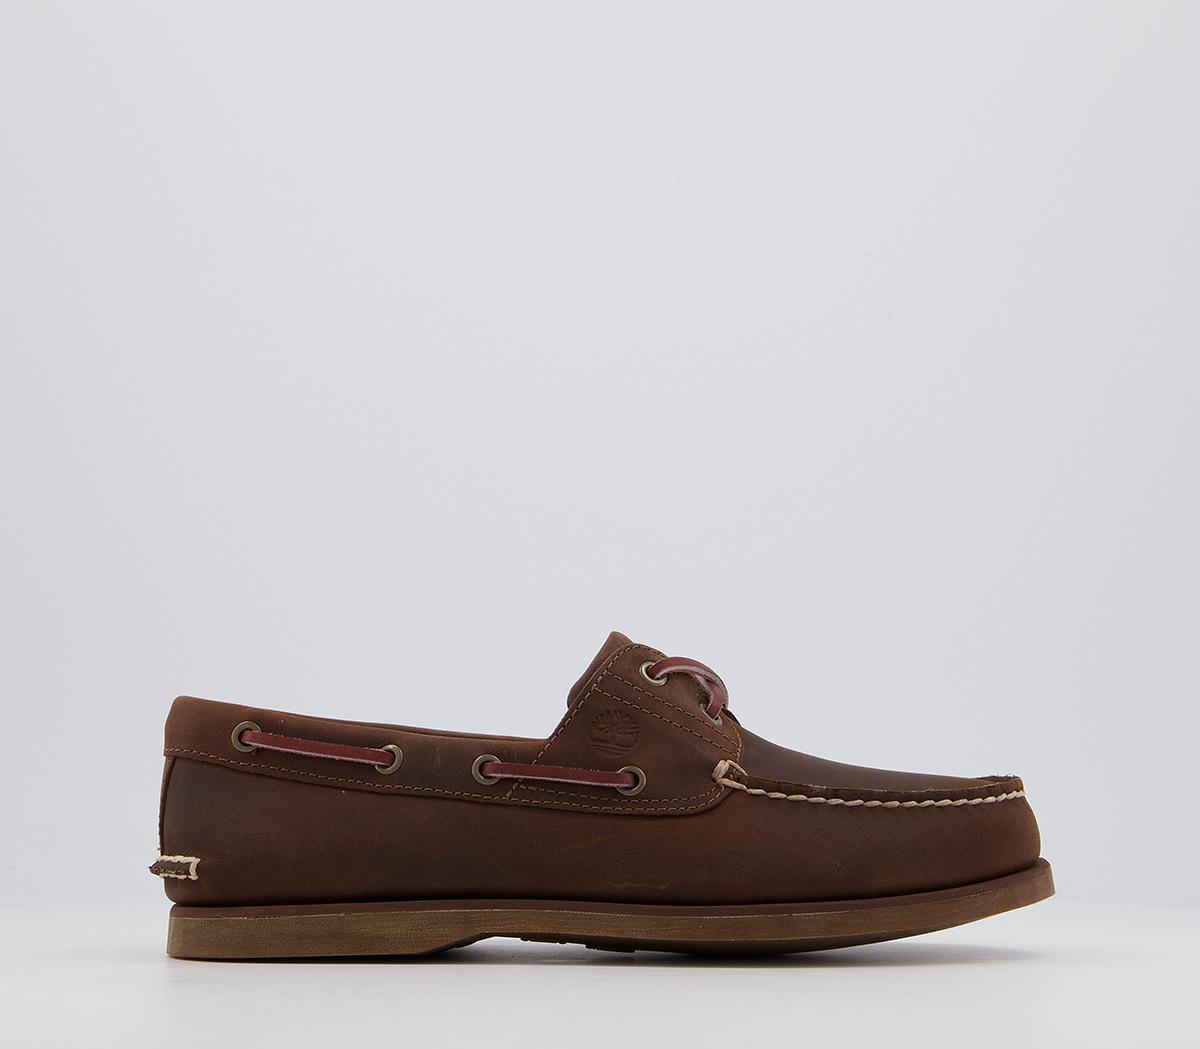 TimberlandNew Boat ShoesGaucho Roughcut Smooth